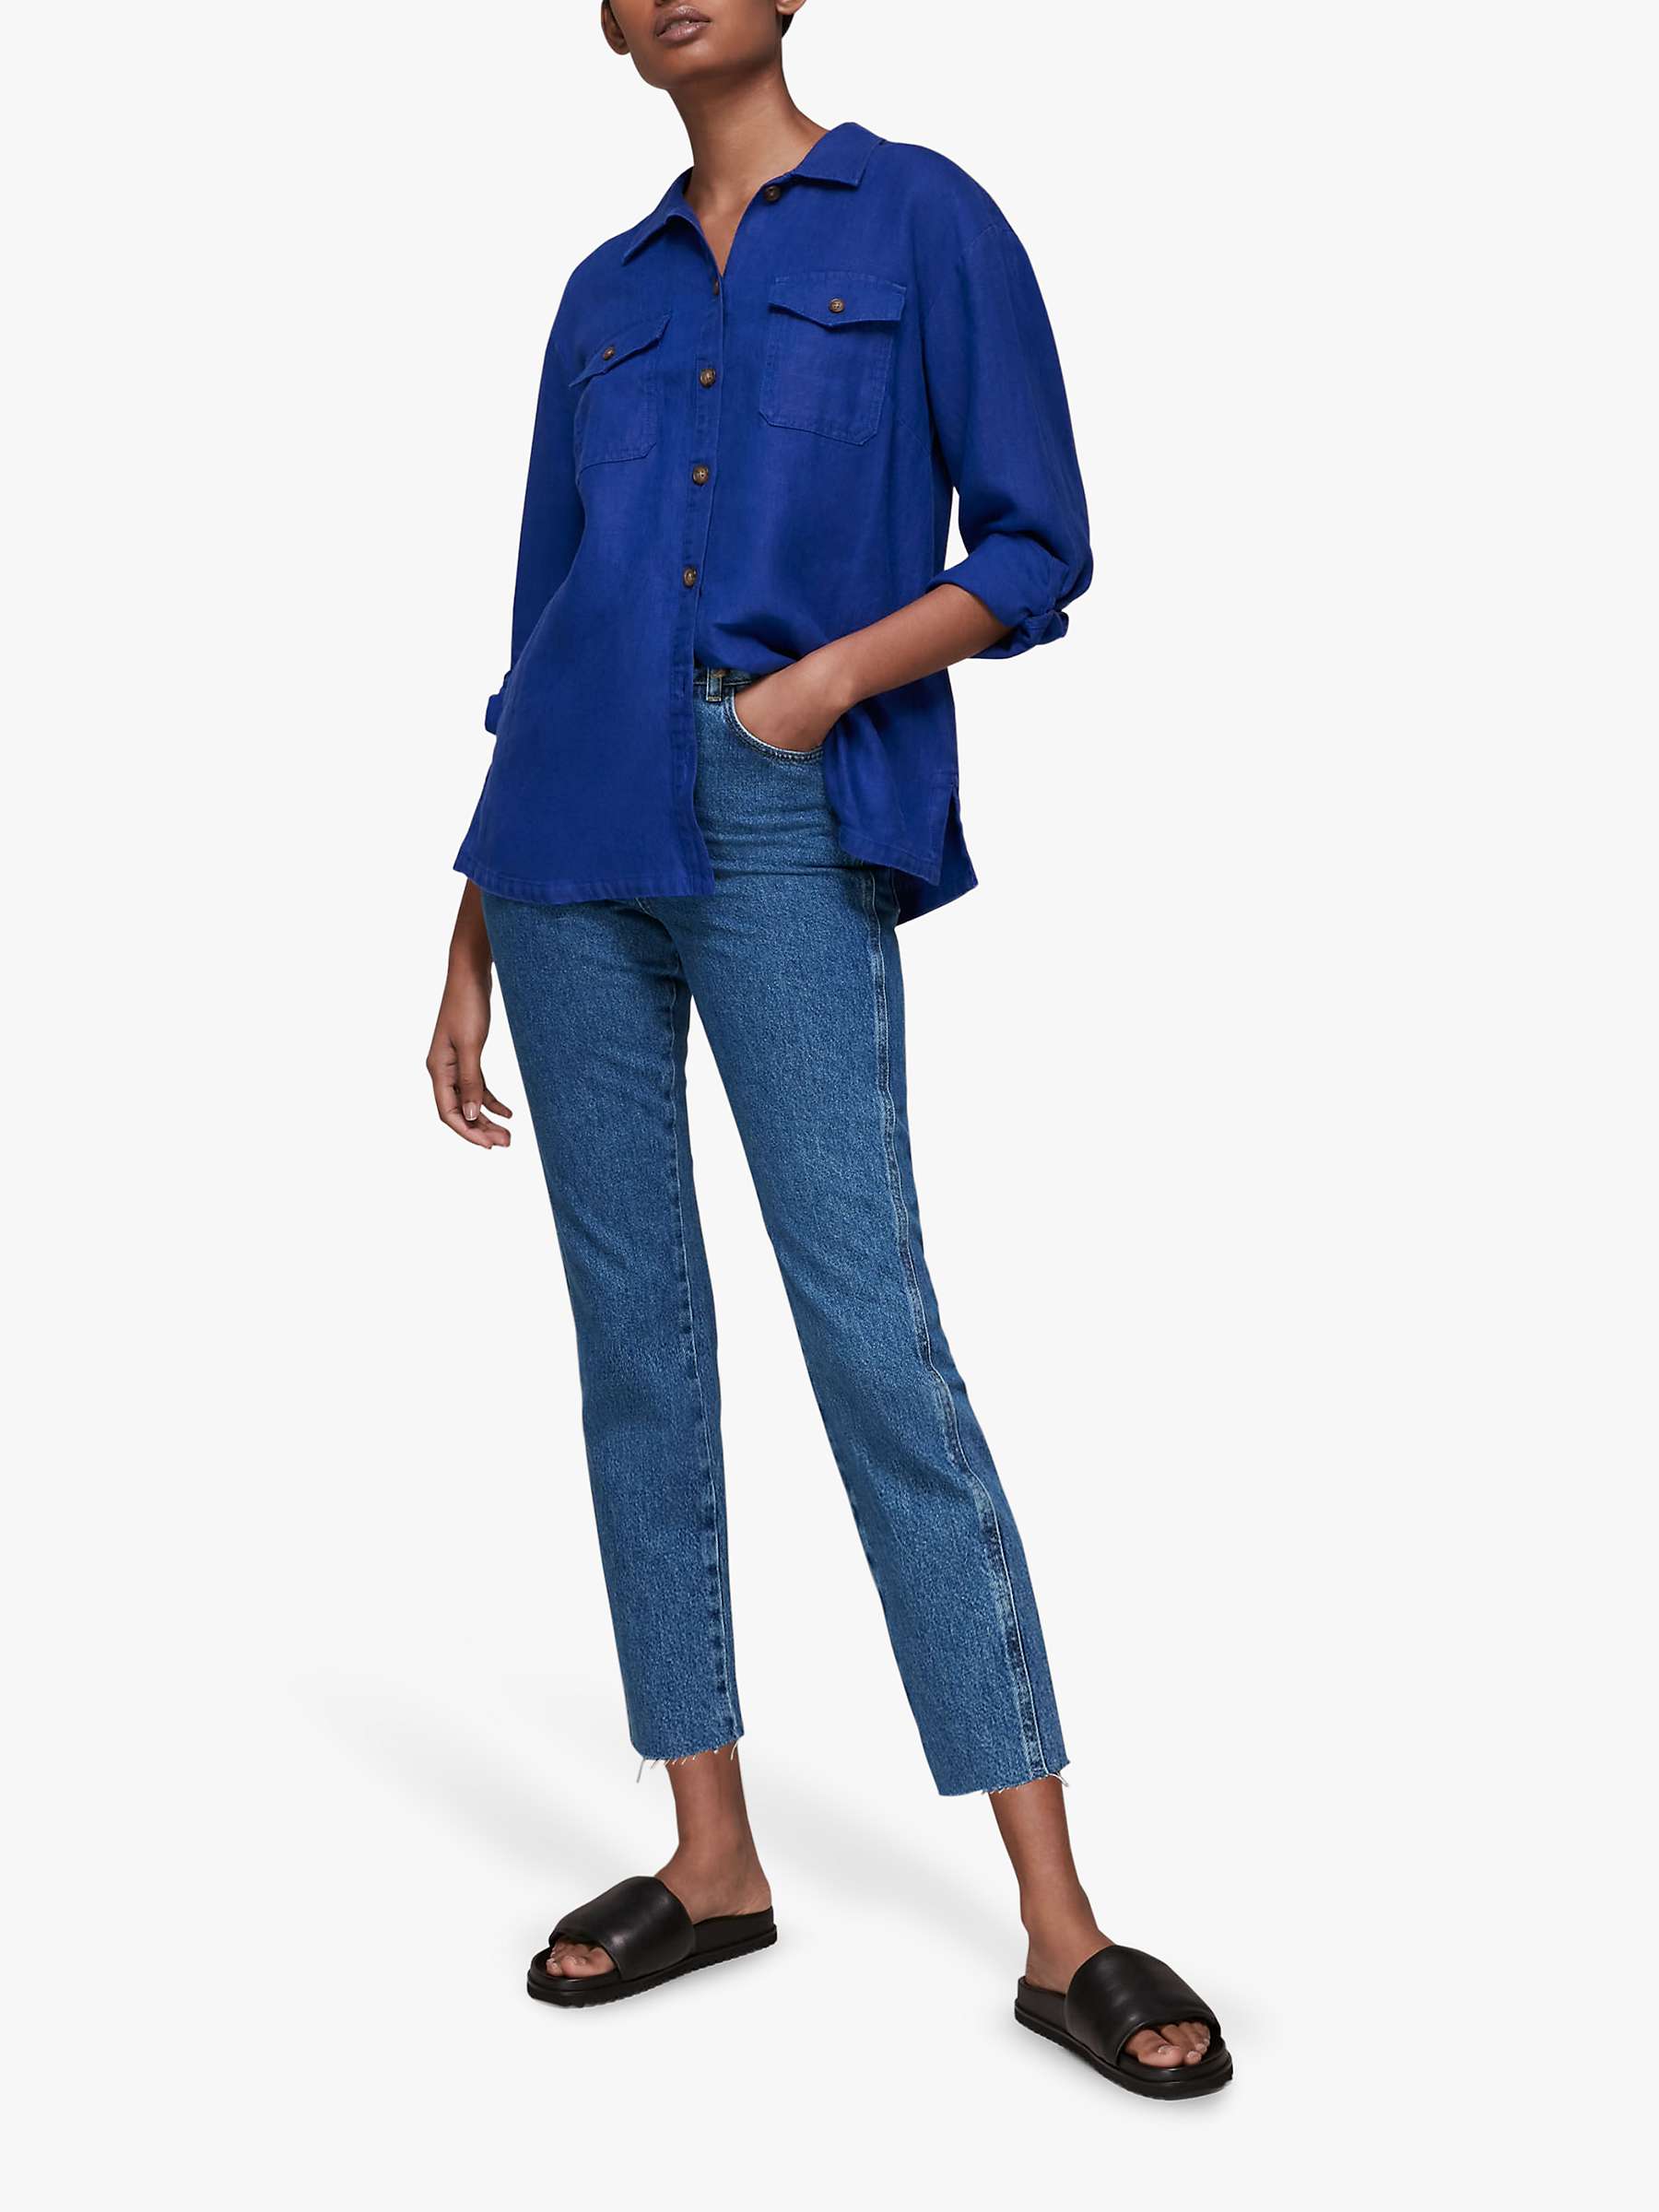 Buy Whistles Authentic Slim Leg Frayed Jeans Online at johnlewis.com